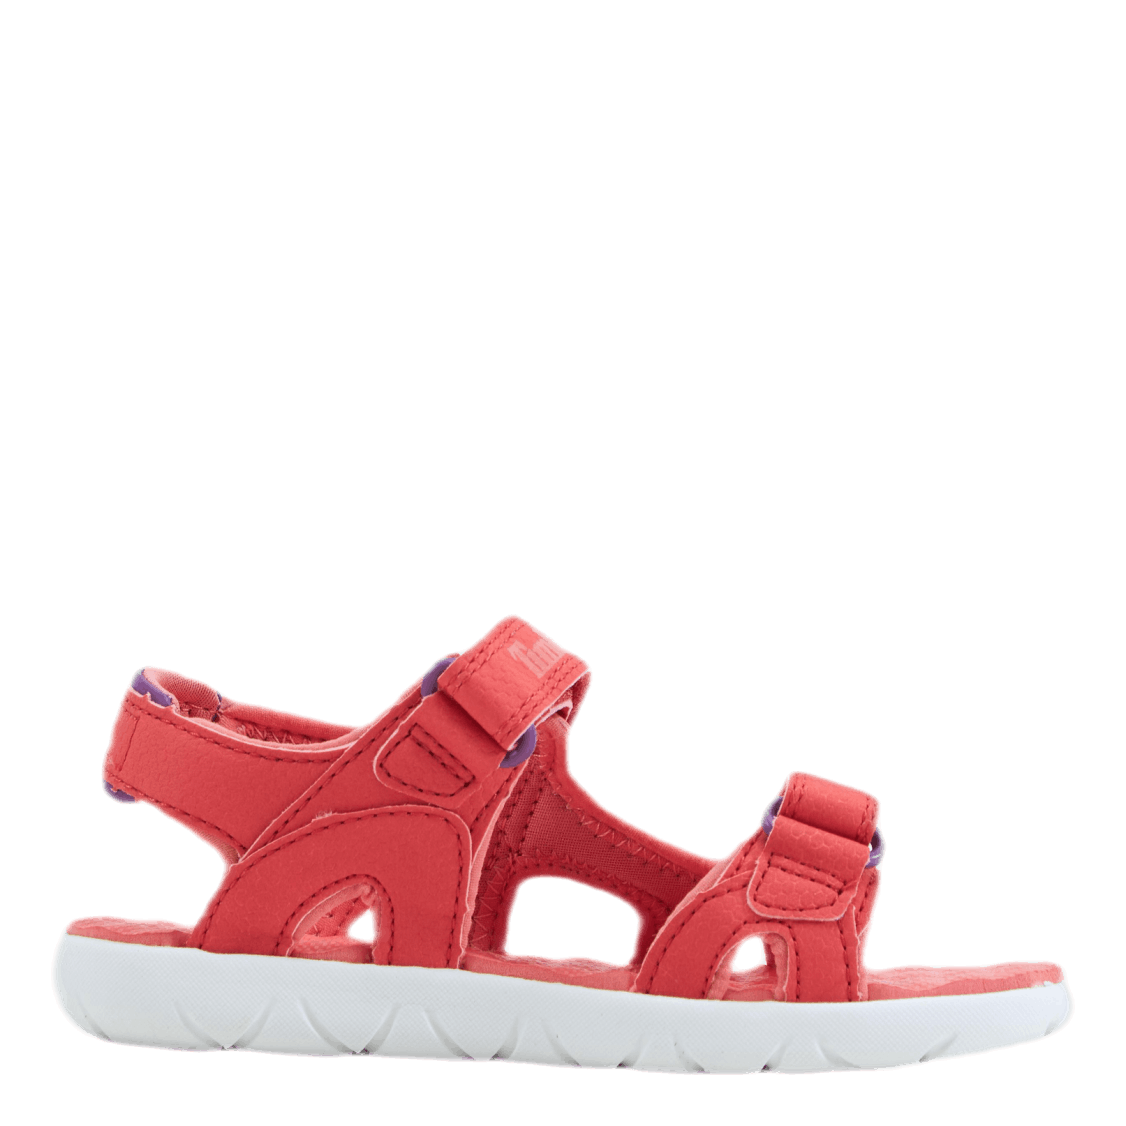 Perkins Row 2-Strap Red